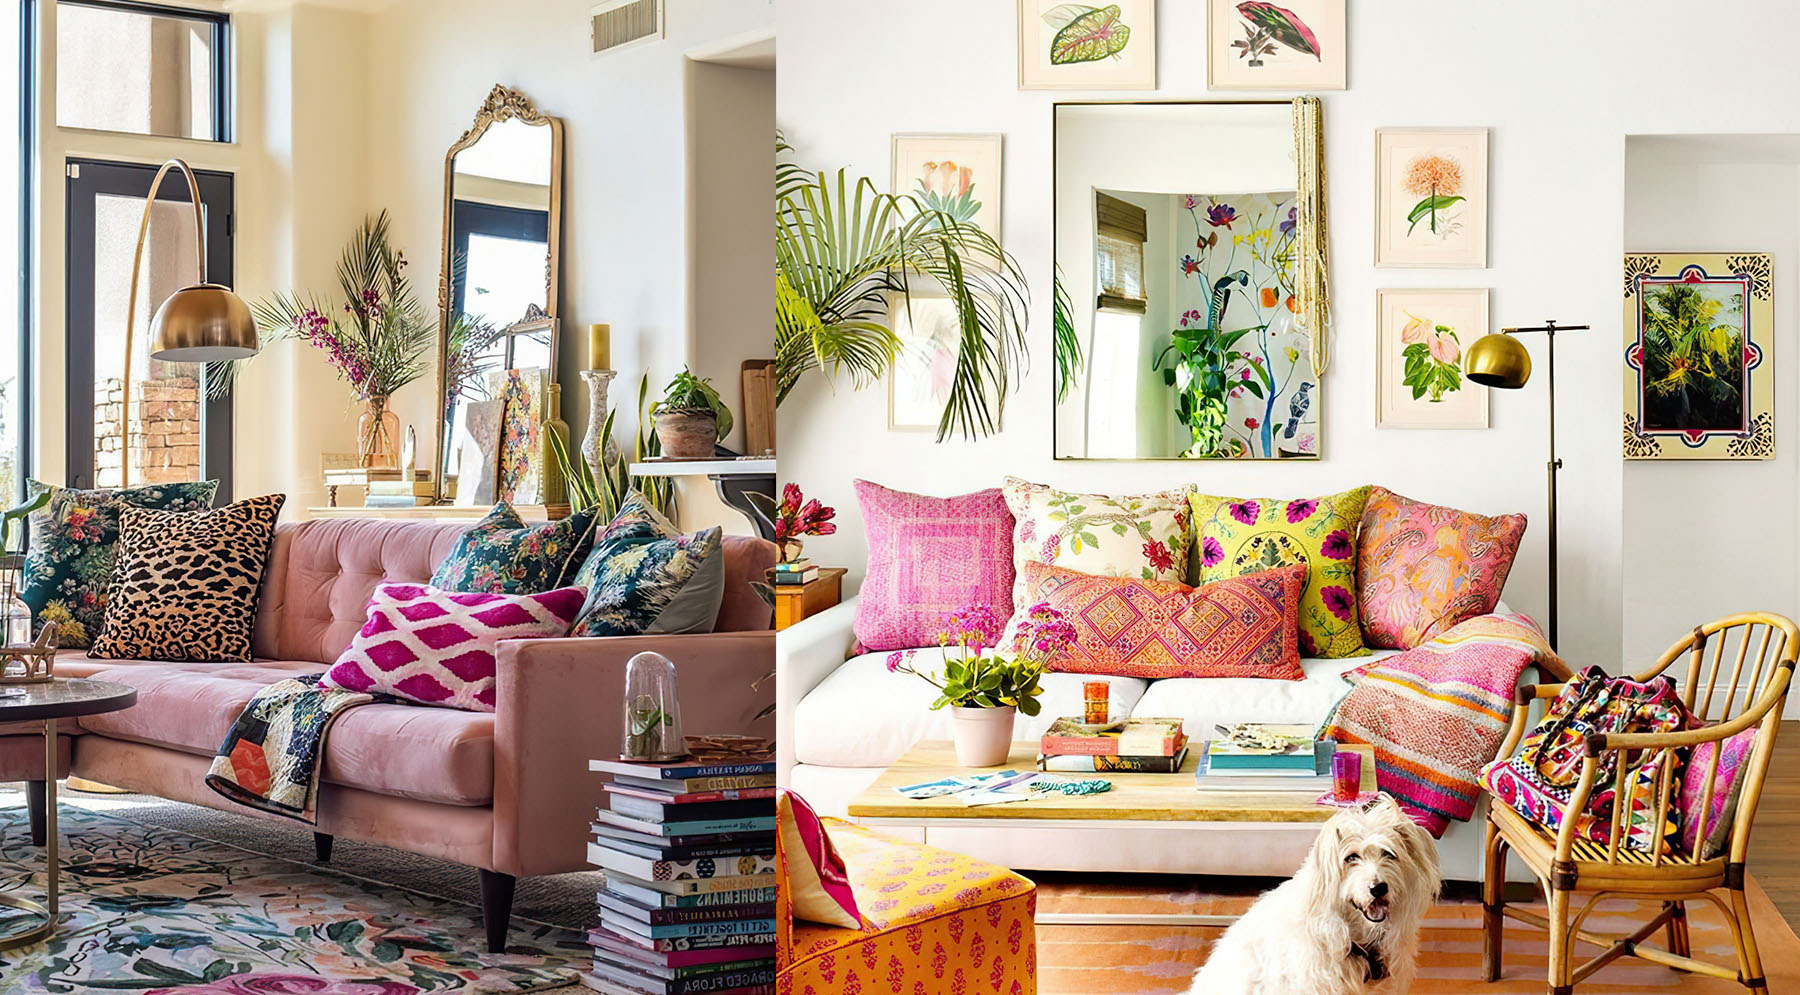 How To Mix and Match Textile Patterns like a Bohemian Superstar